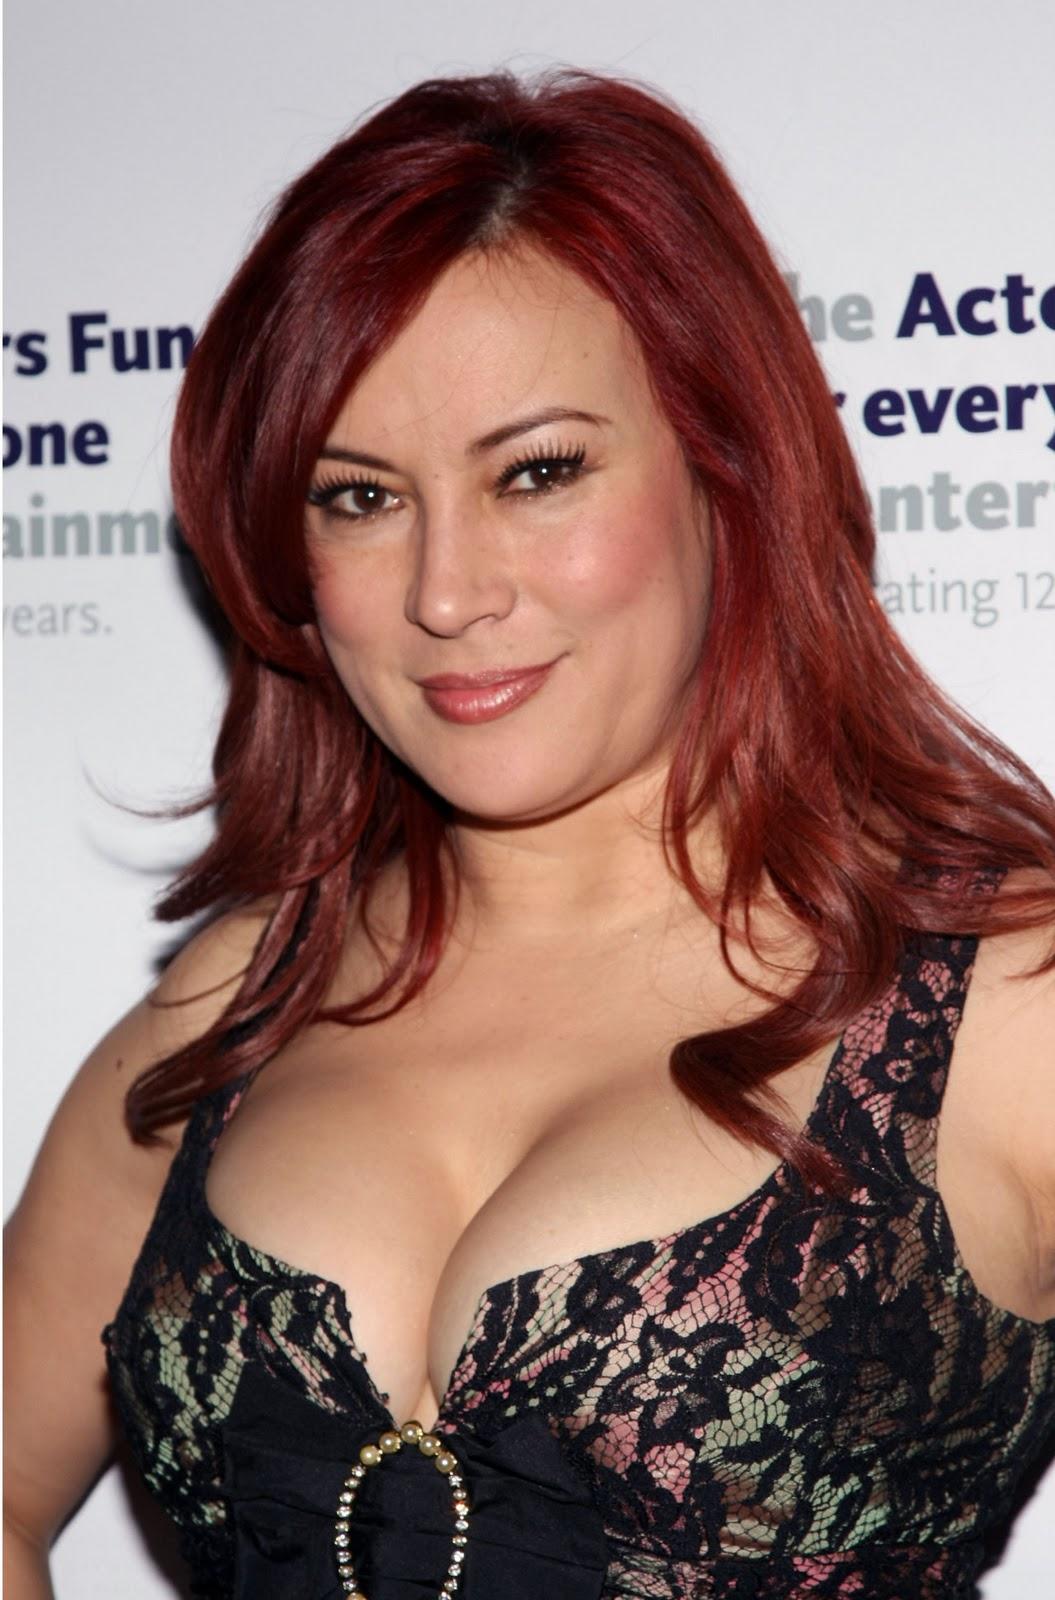 49 Hottest Jennifer Tilly Big Butt pictures Will Expedite An Enormous Smile On Your Face | Best Of Comic Books